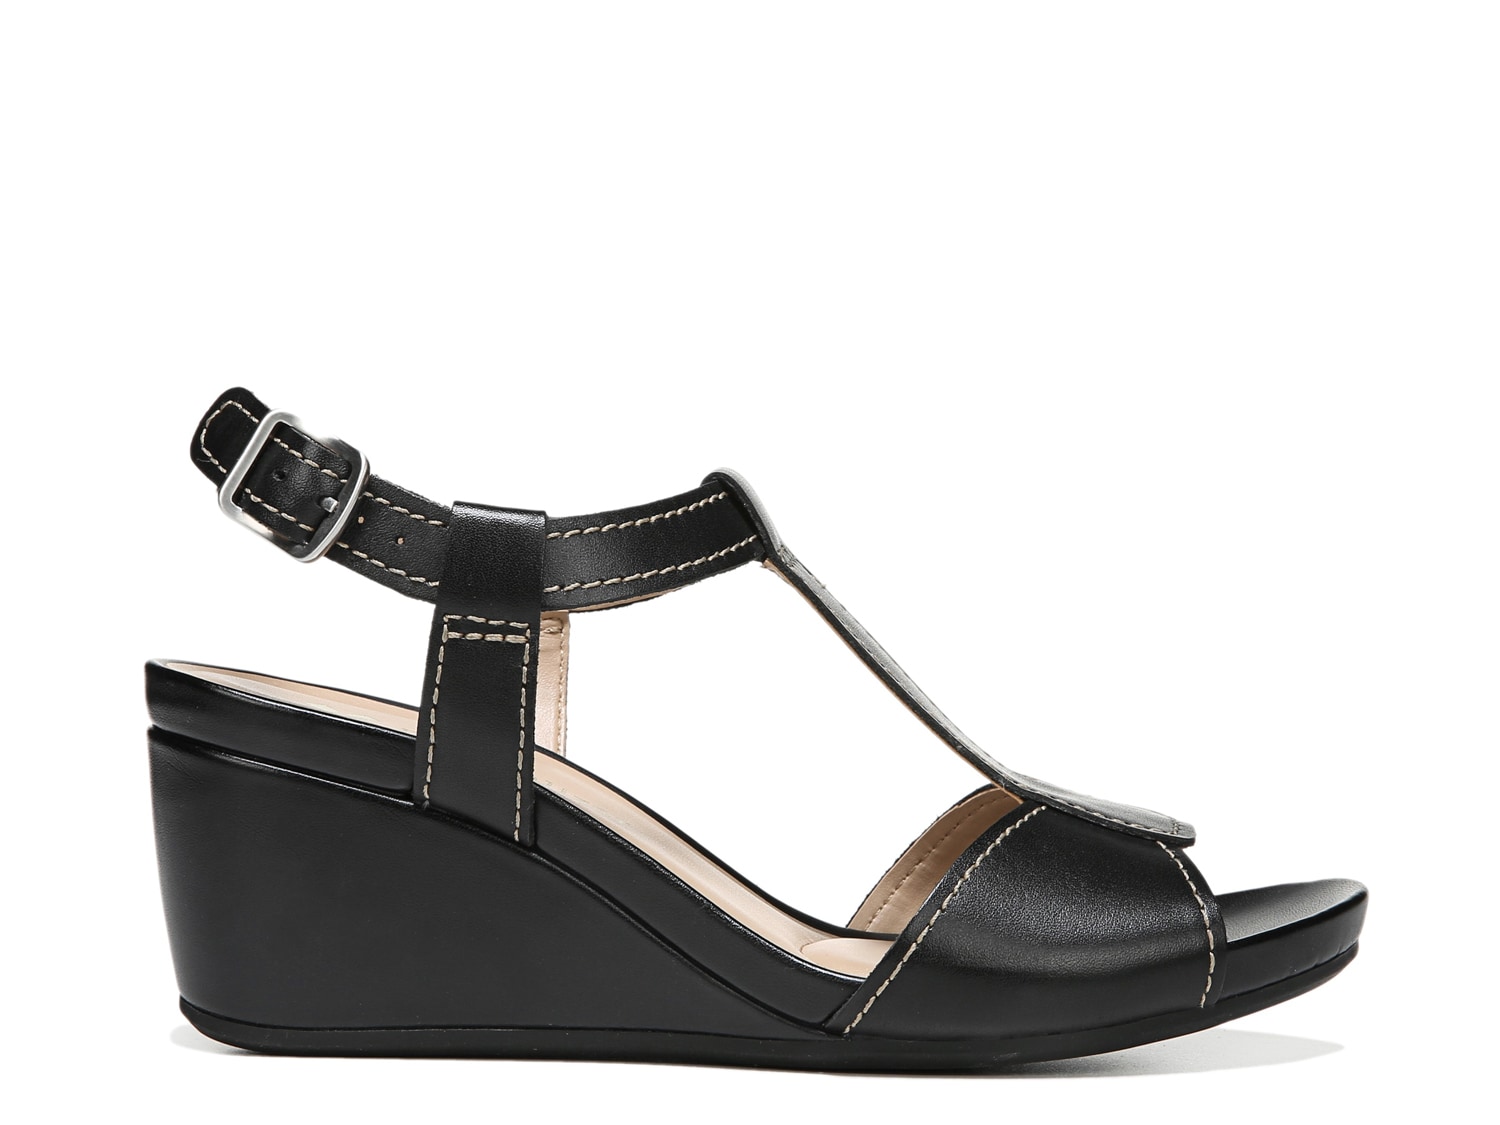 Naturalizer Camilla Wedge Sandal Women's Shoes | DSW